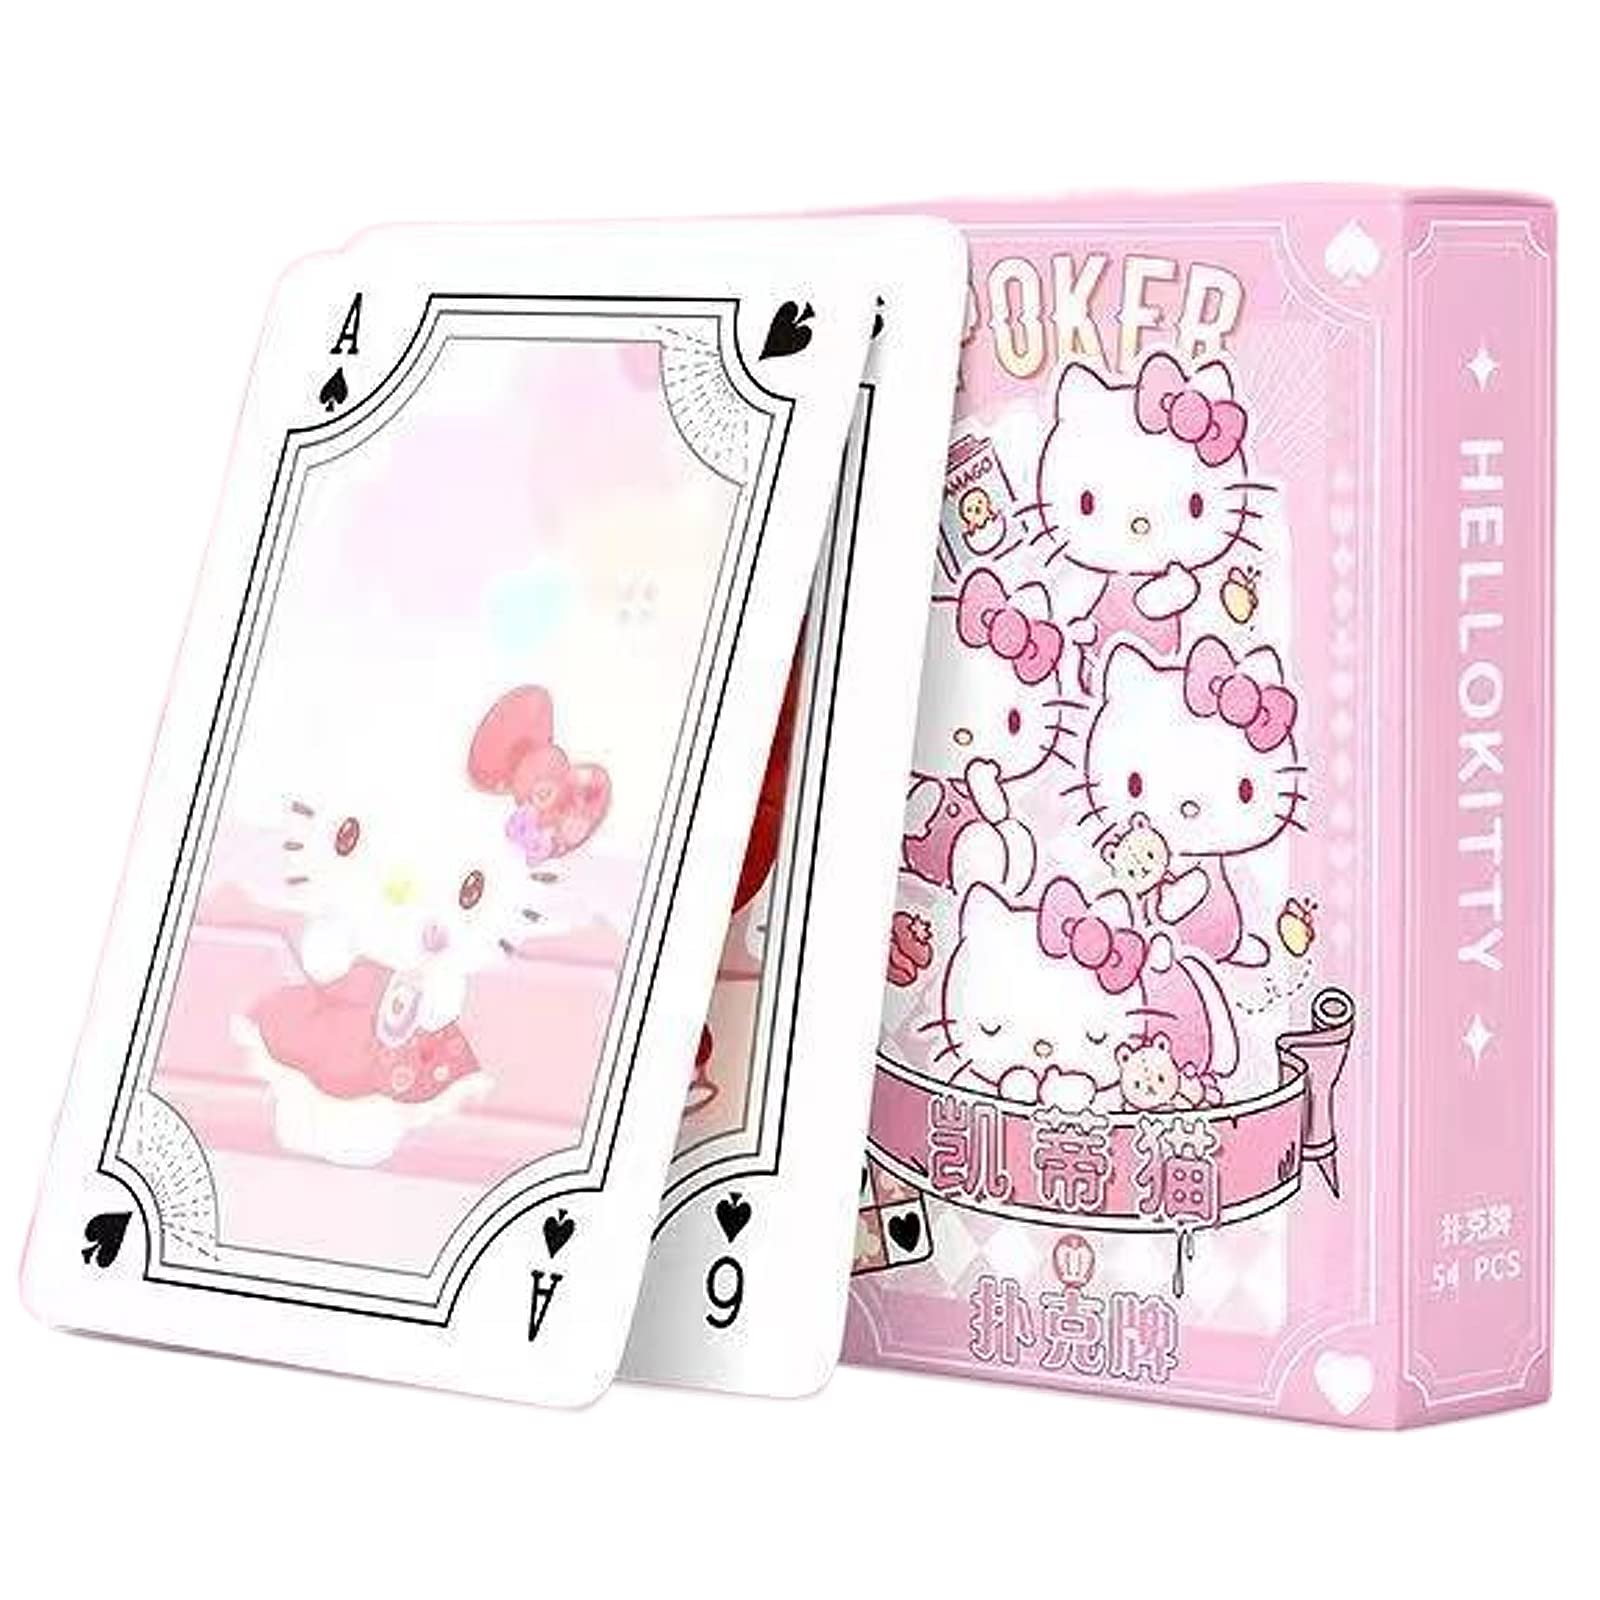 Oxsioeih 54 Pcs Kawaii Playing Cards for Card Games Poker Cards Cute Cartoons Deck of Cards Table Game Cards 3.5in × 2.4in